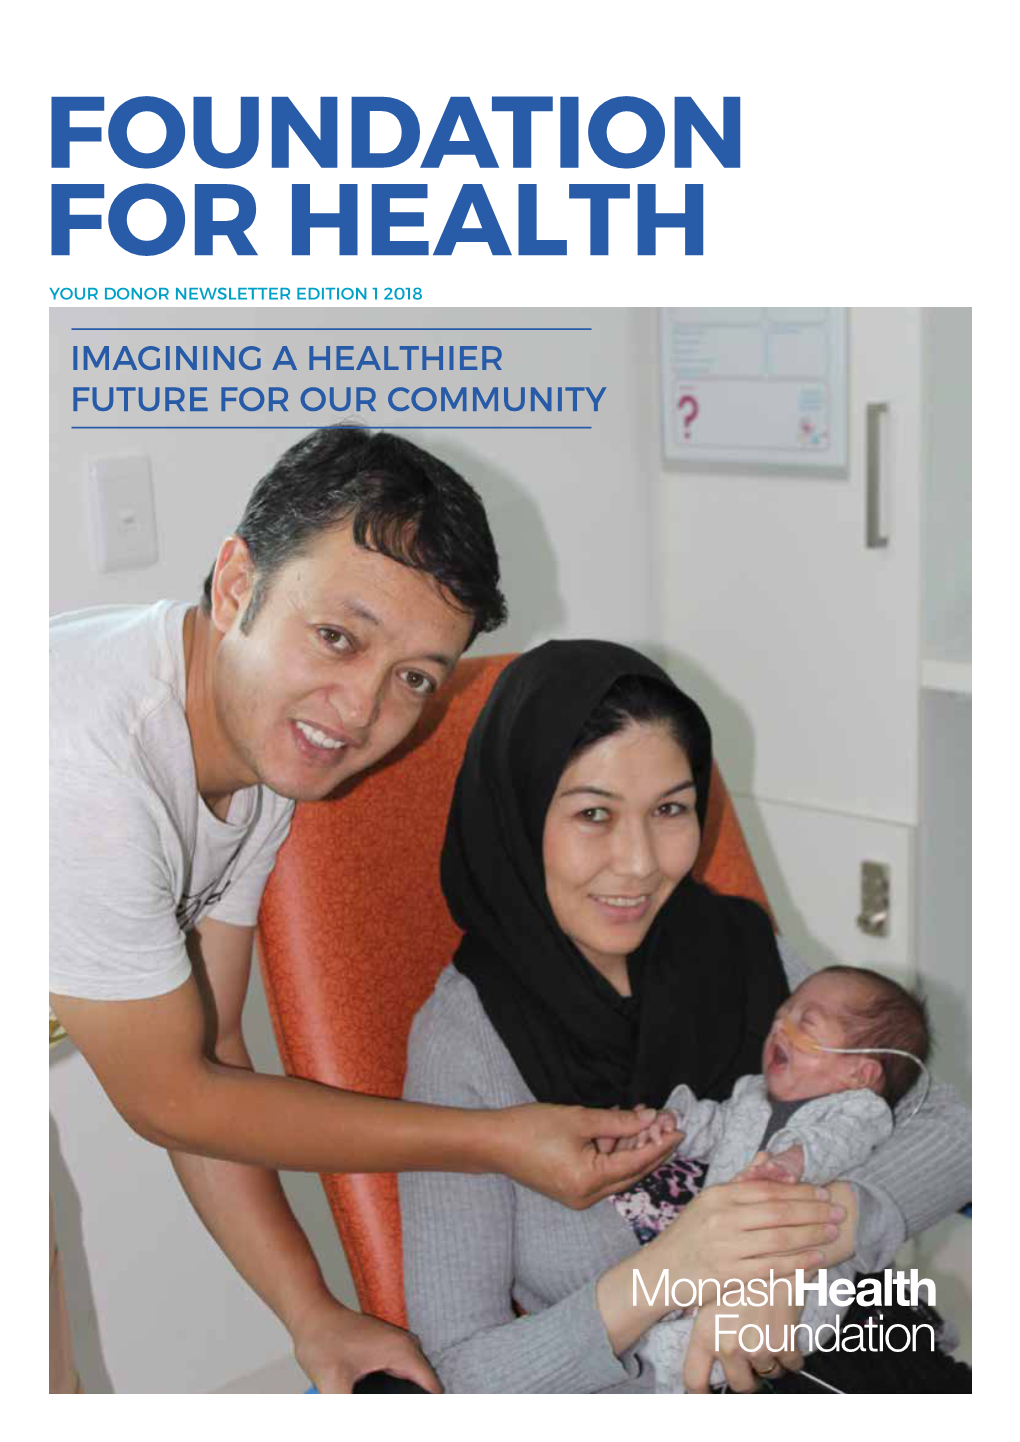 Foundation for Health Your Donor Newsletter Edition 1 2018